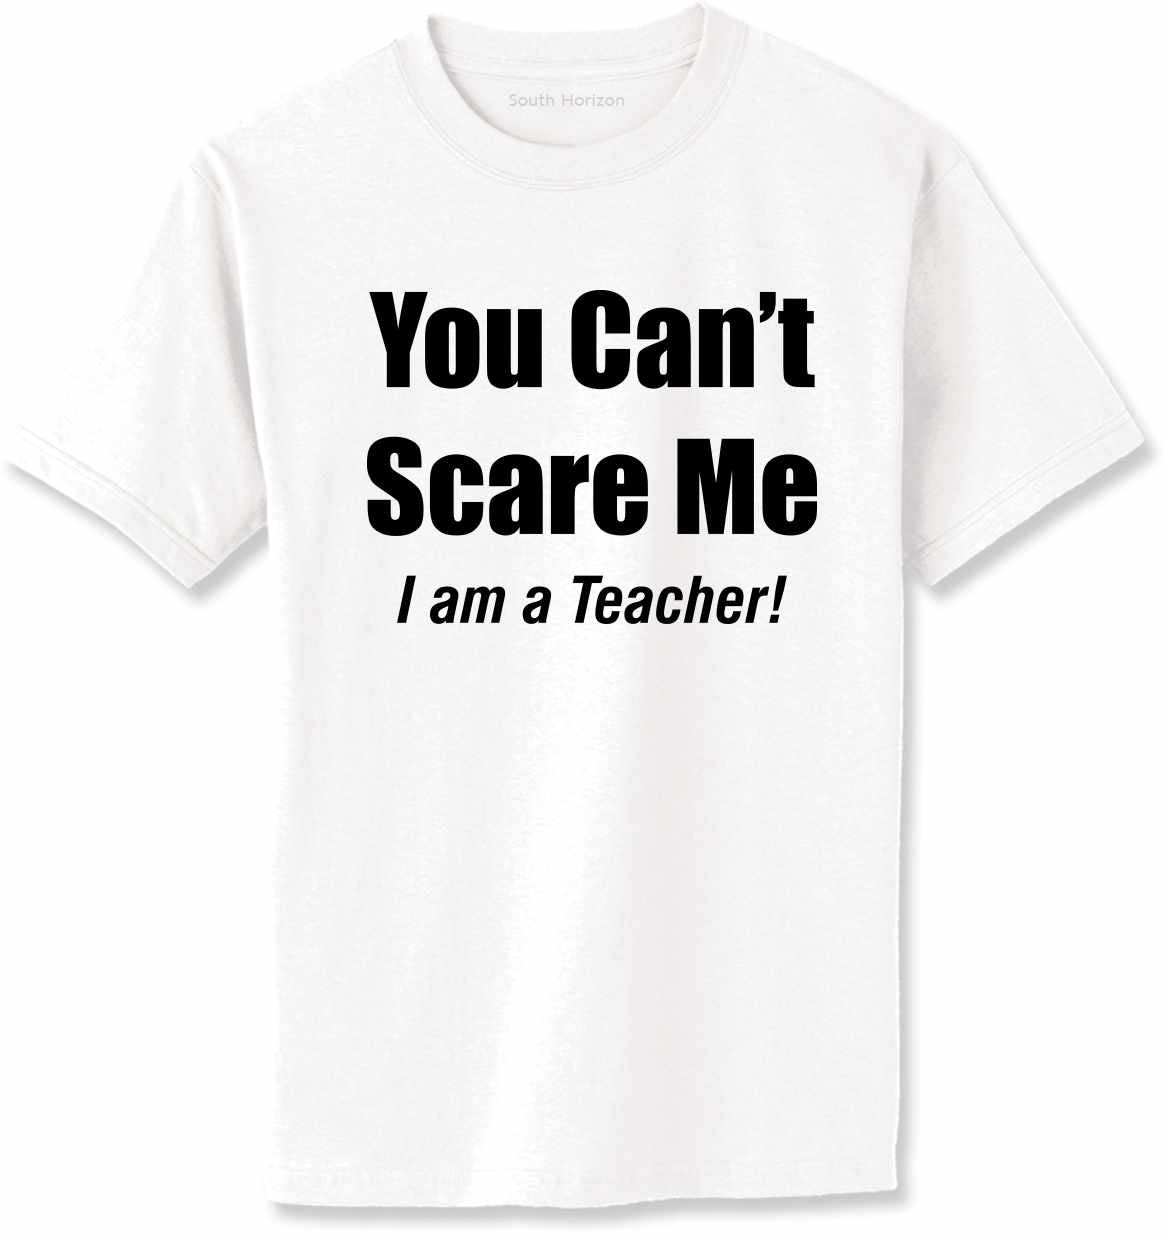 You Can't Scare Me, I am a Teacher Adult T-Shirt (#949-1)